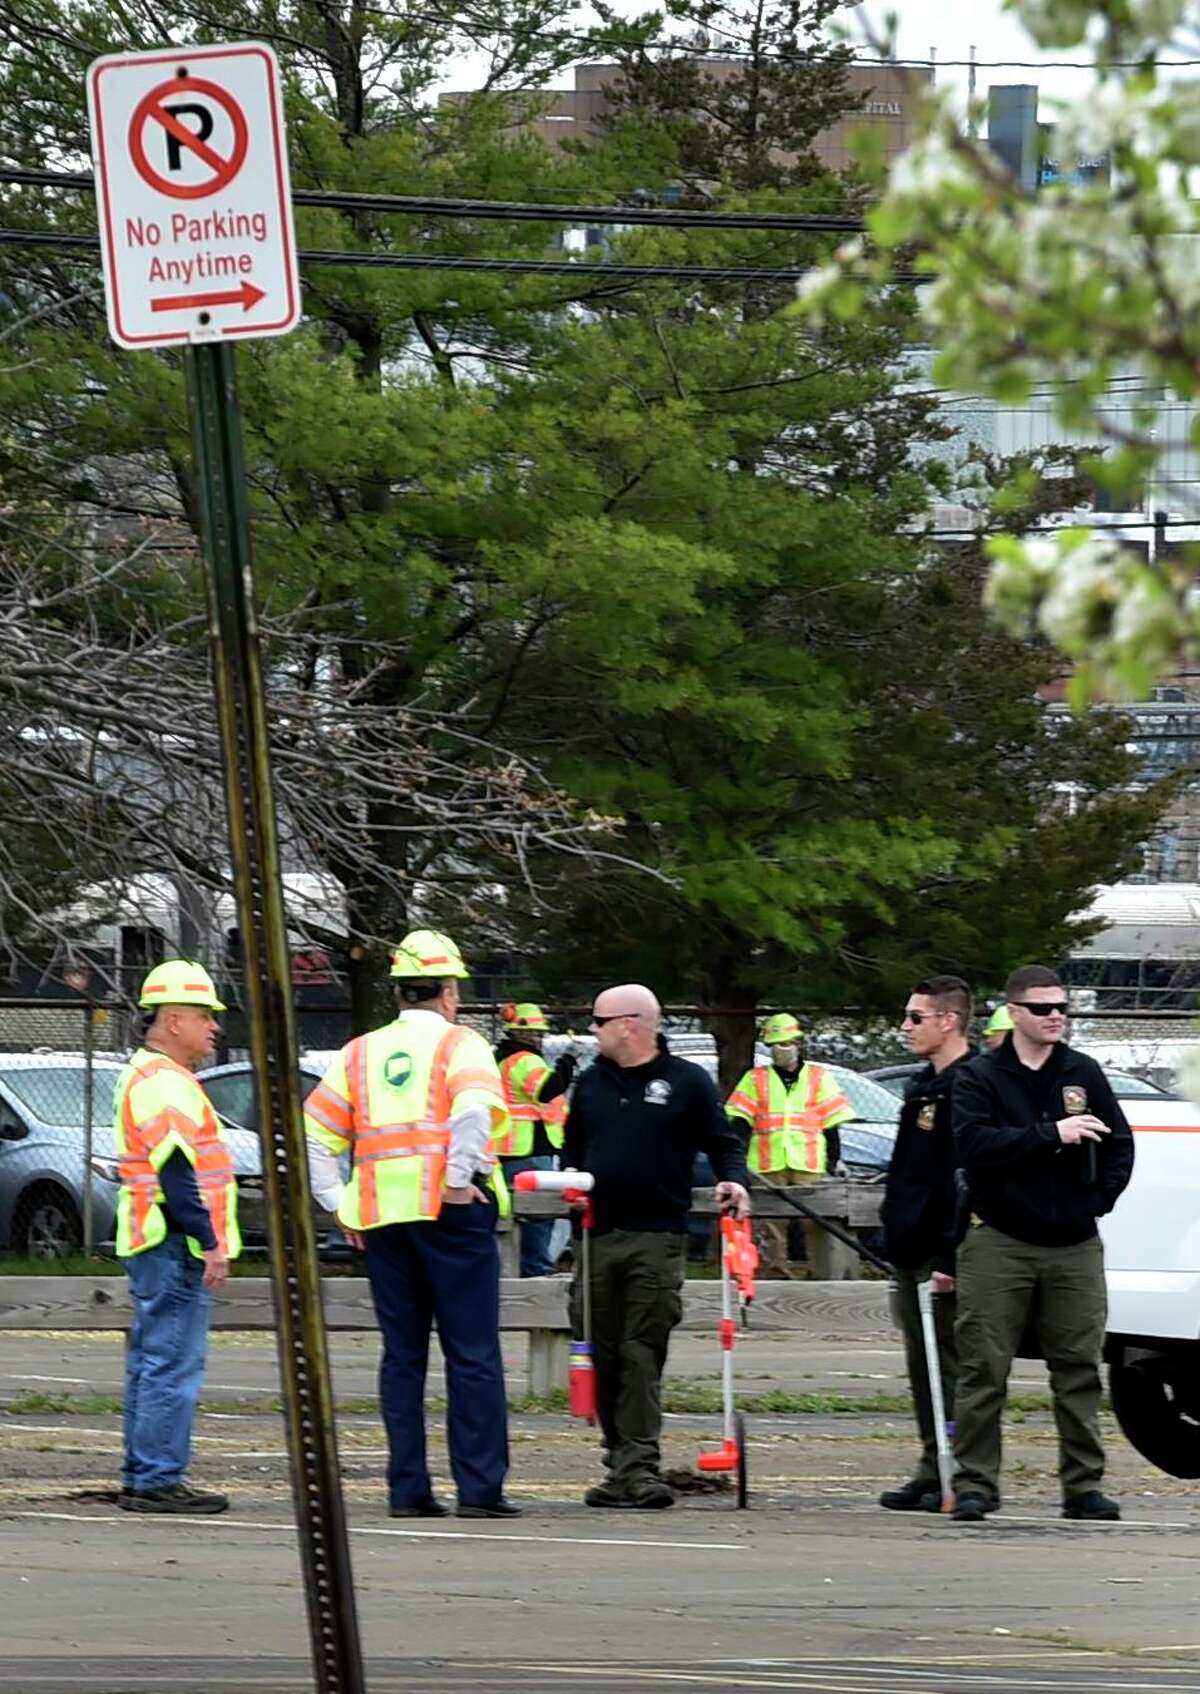 Connecticut State Police arrive to survey traffic patterns at the drive-through COVID-19 testing site Tuesday, April 14, 2020 at the former Gateway Community College at 60 Sargent Drive in New Haven. It will be opened soon by the state in conjunction with CVS and Abbott Laboratories, using four lanes and able to accommodate up to 750 cars daily. Connecticut State Police will be part of the operation, directing traffic off Exit 46 at Long Wharf. Rick Fontana, the city’s director of the Office of Emergency Management, said it will be the only such site in Connecticut.